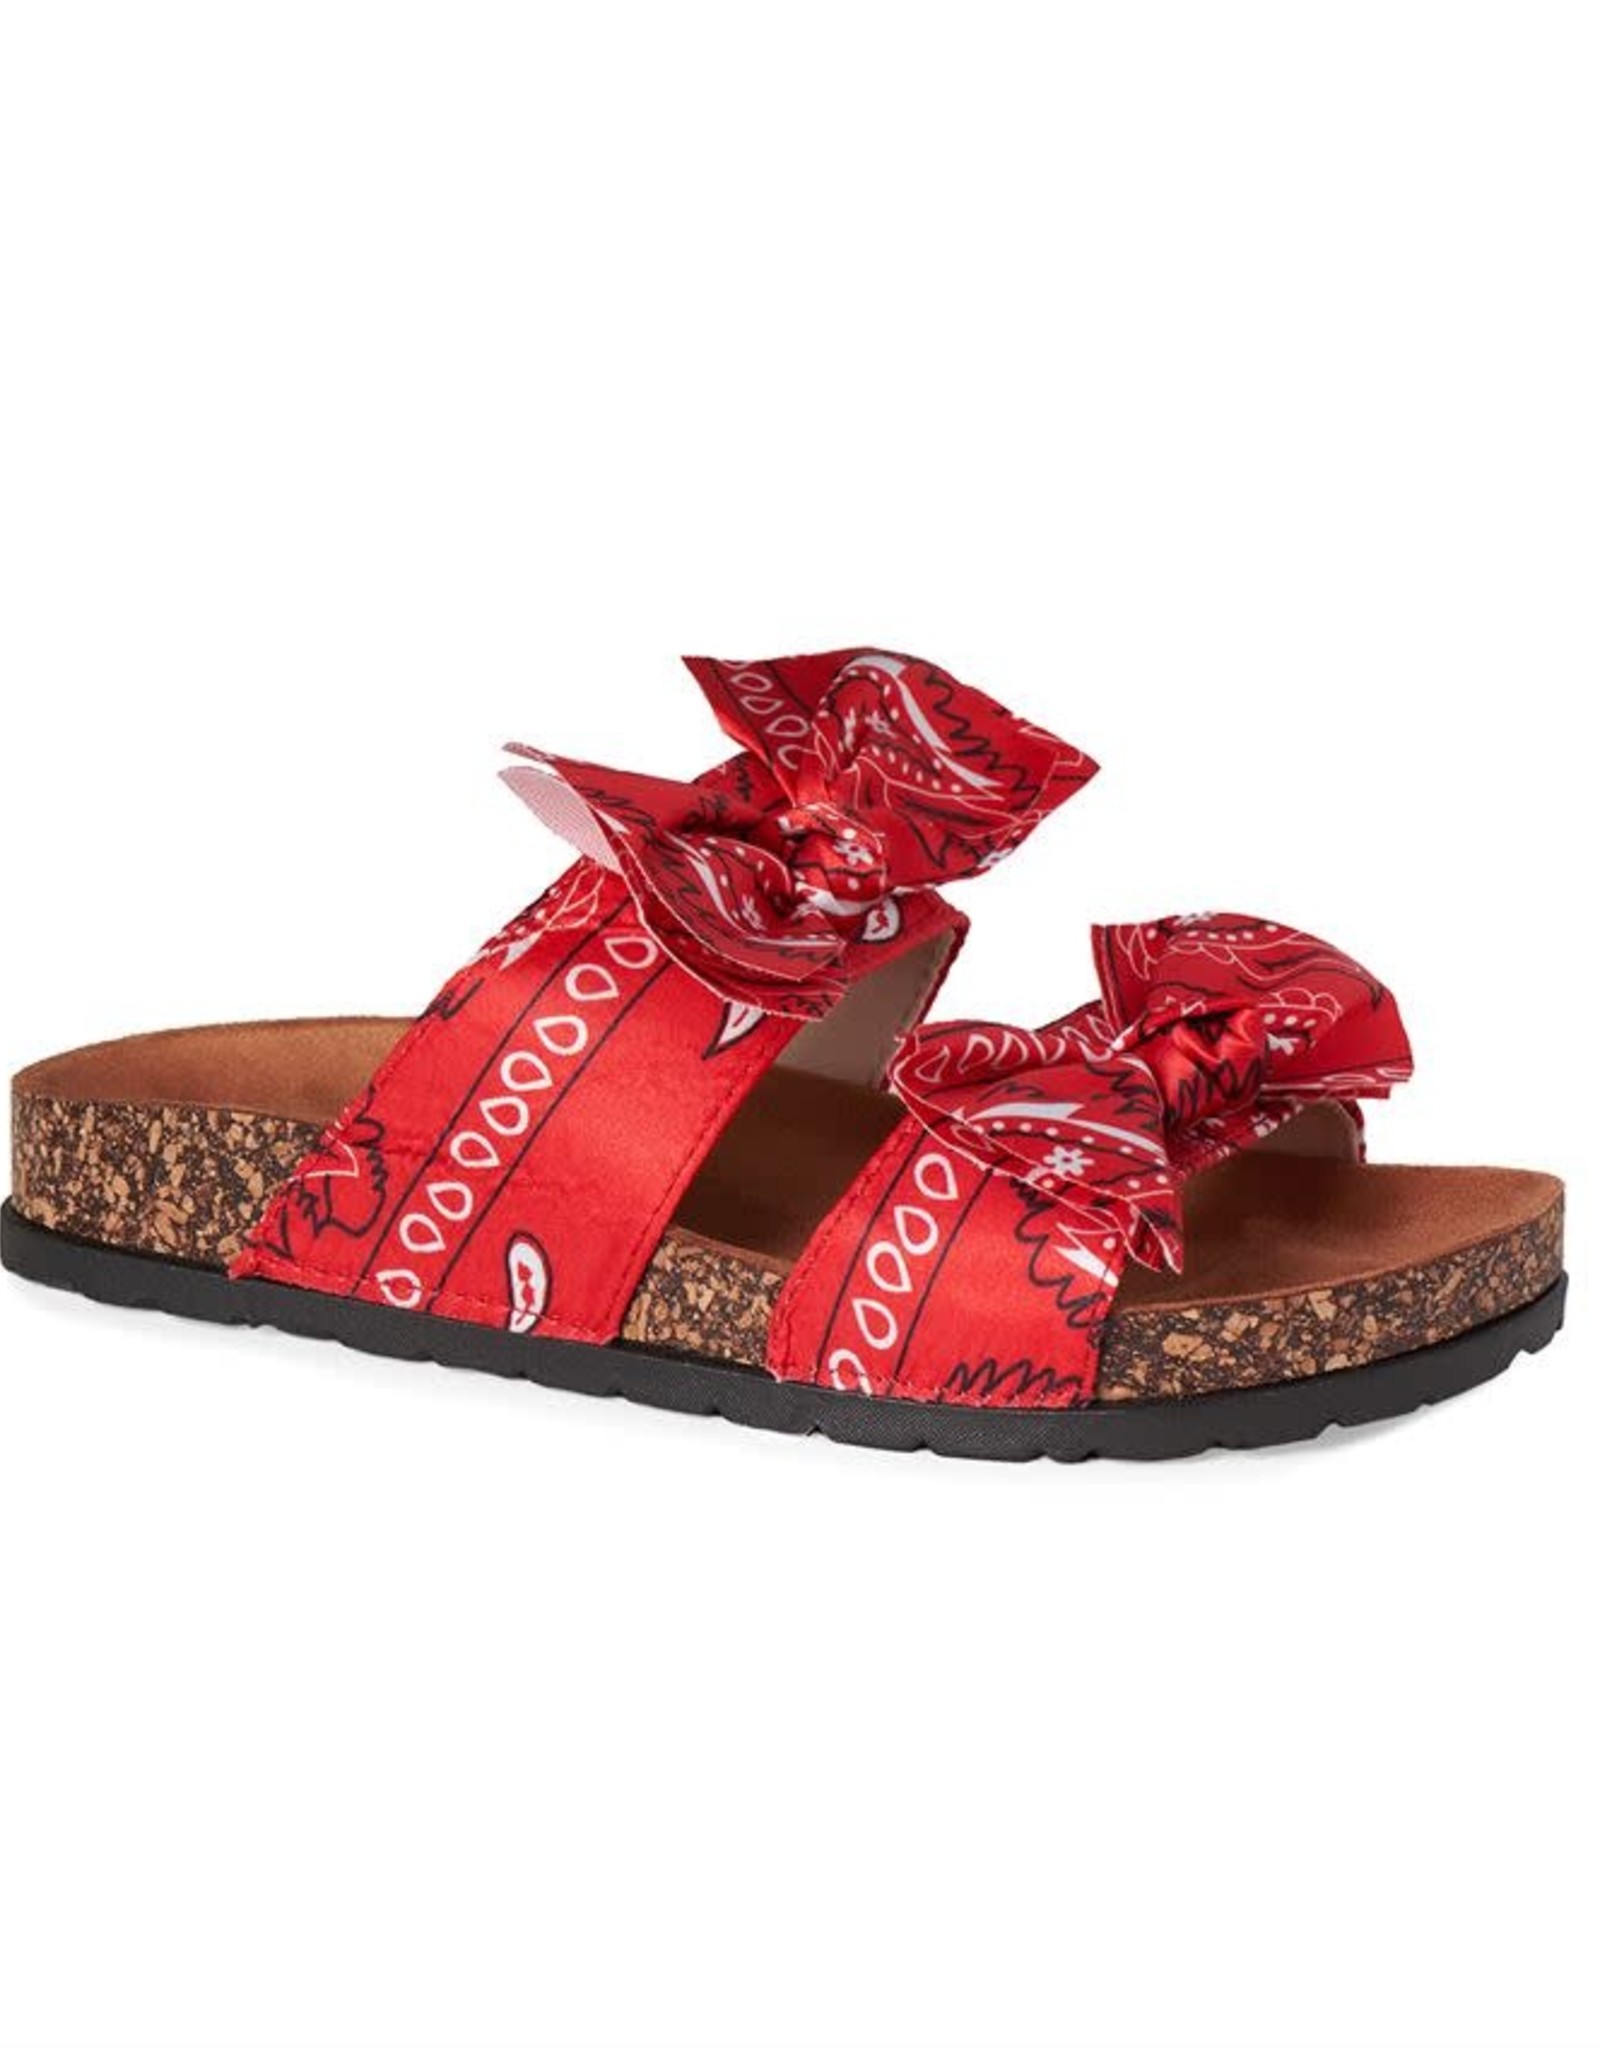 Coco & Carmen Americana Knotted Sandals